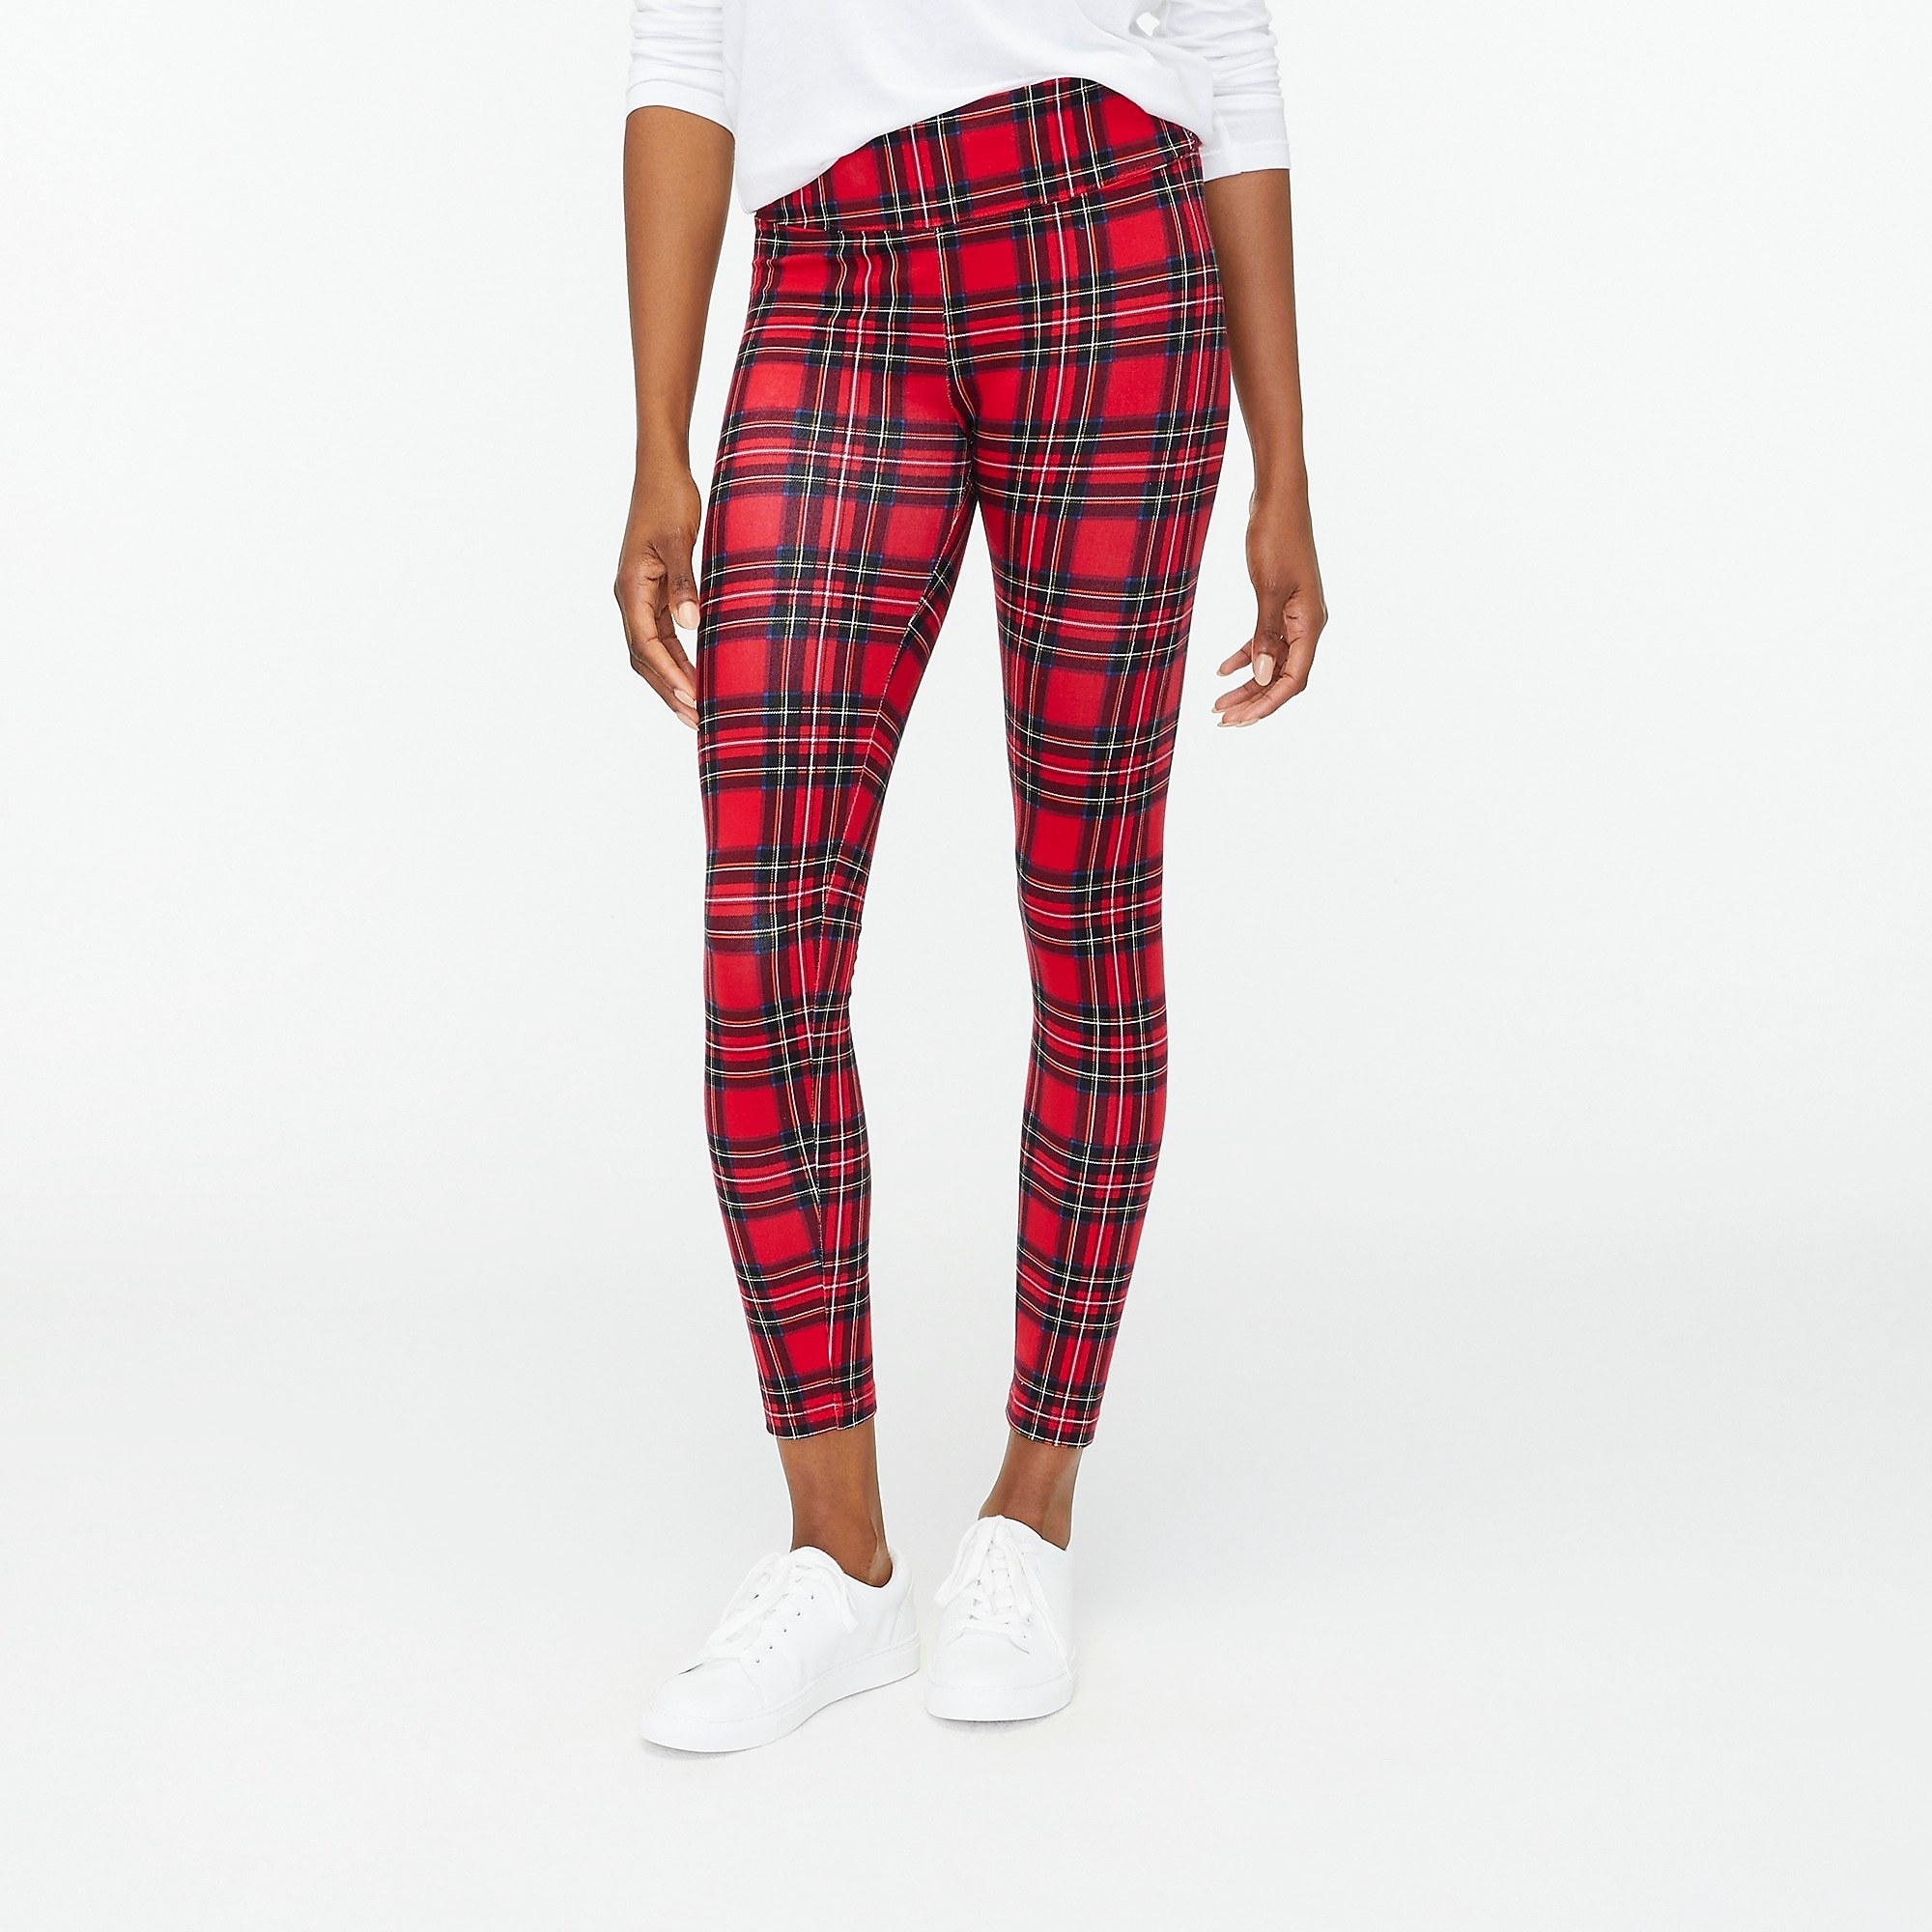 Model wearing red, green and white plaid leggings with white shirt and shoes